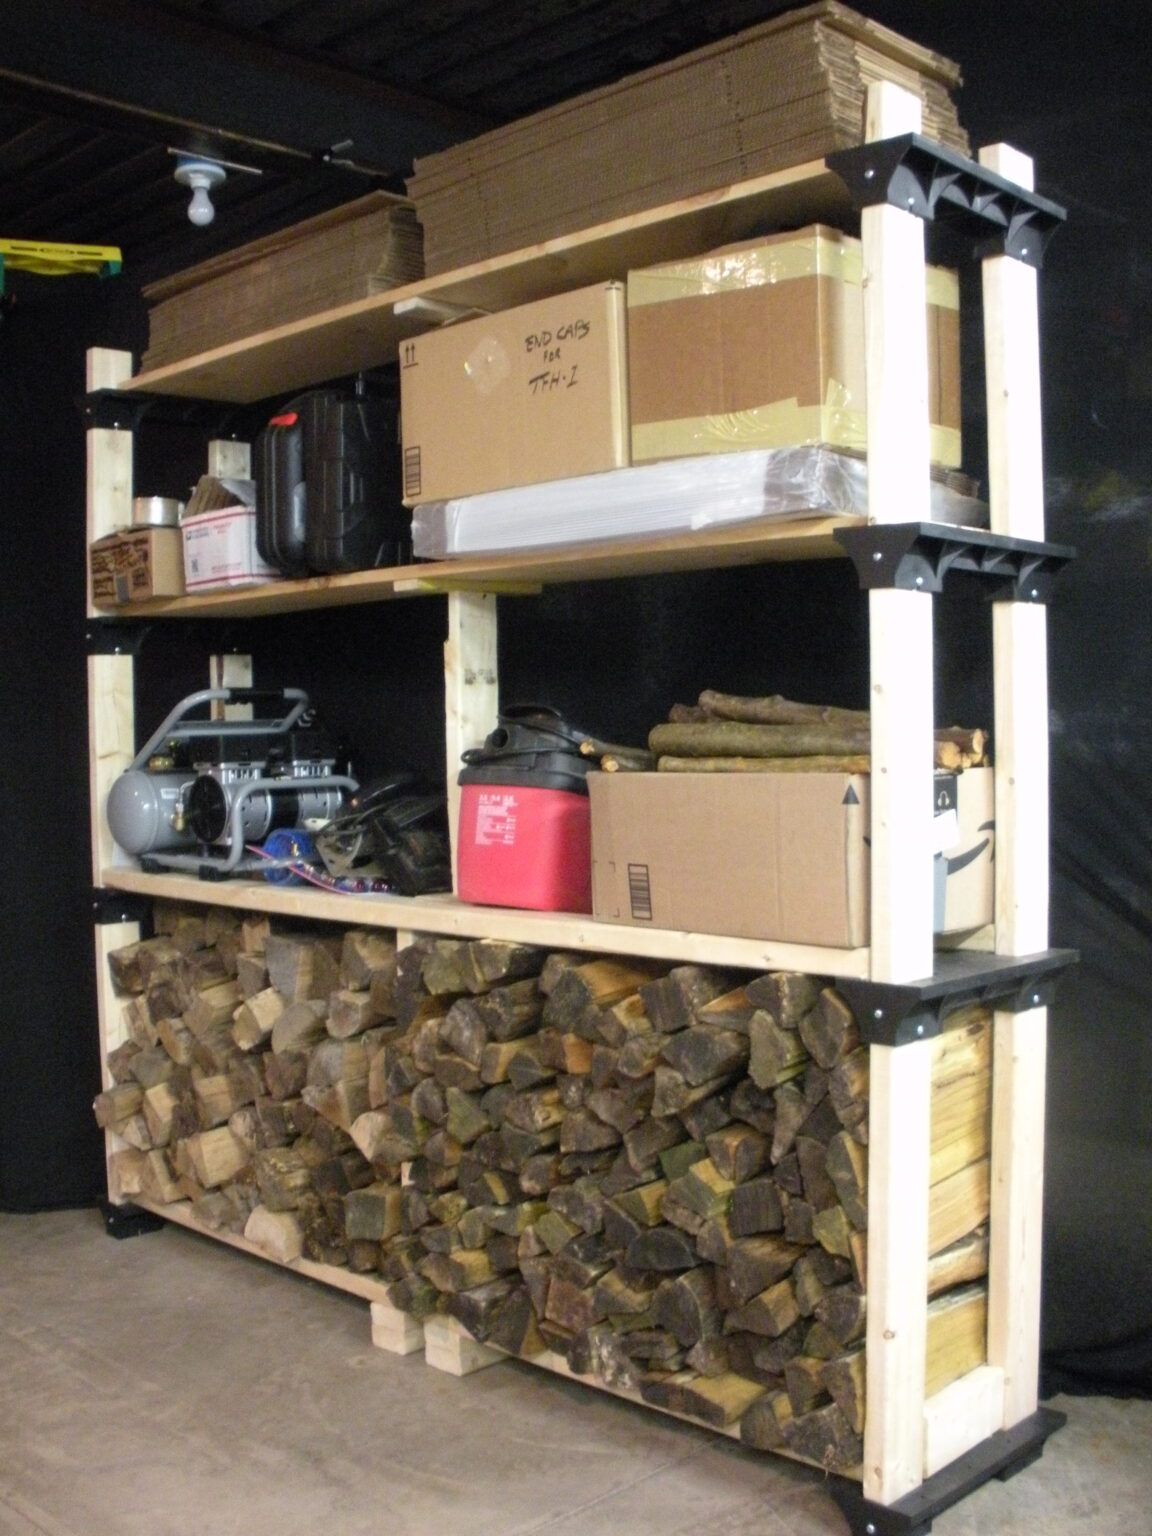 firewood stacked indoors on a custom built 2x4 shelf in a basement workroom.